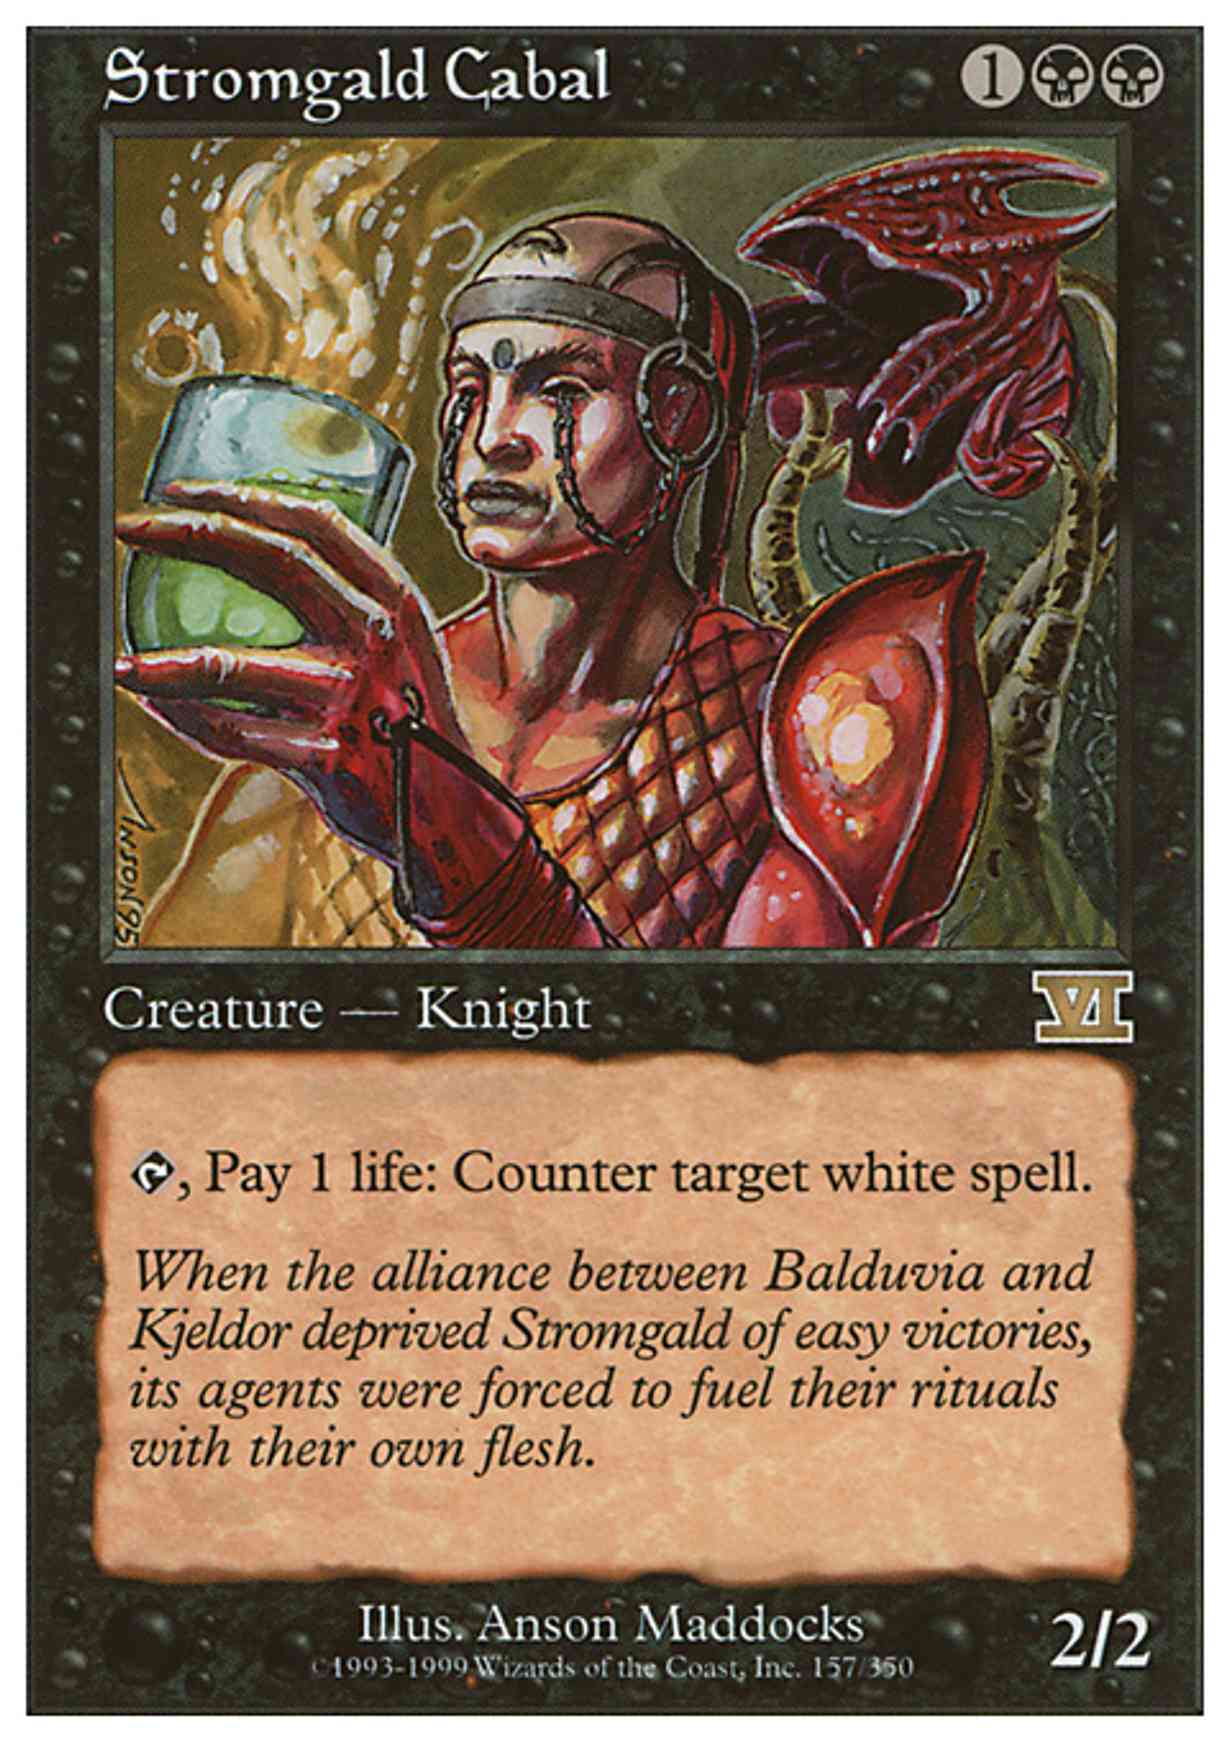 Stromgald Cabal magic card front